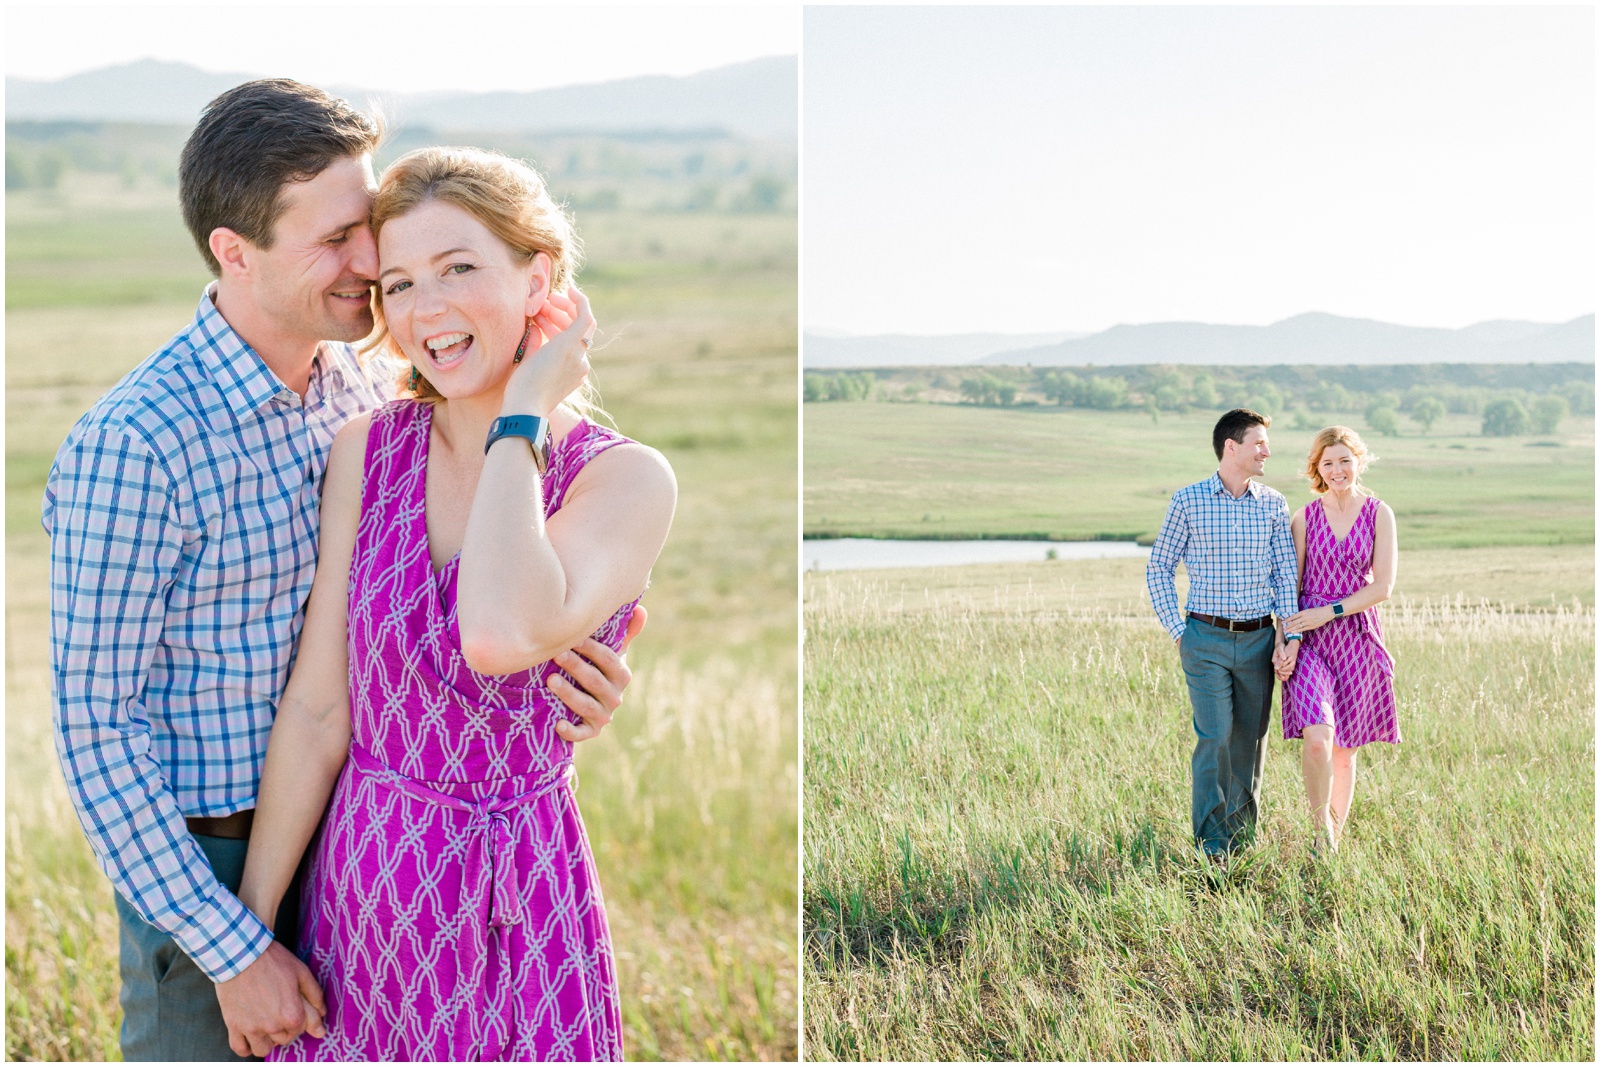 Cute cuddly mountain engagement photos